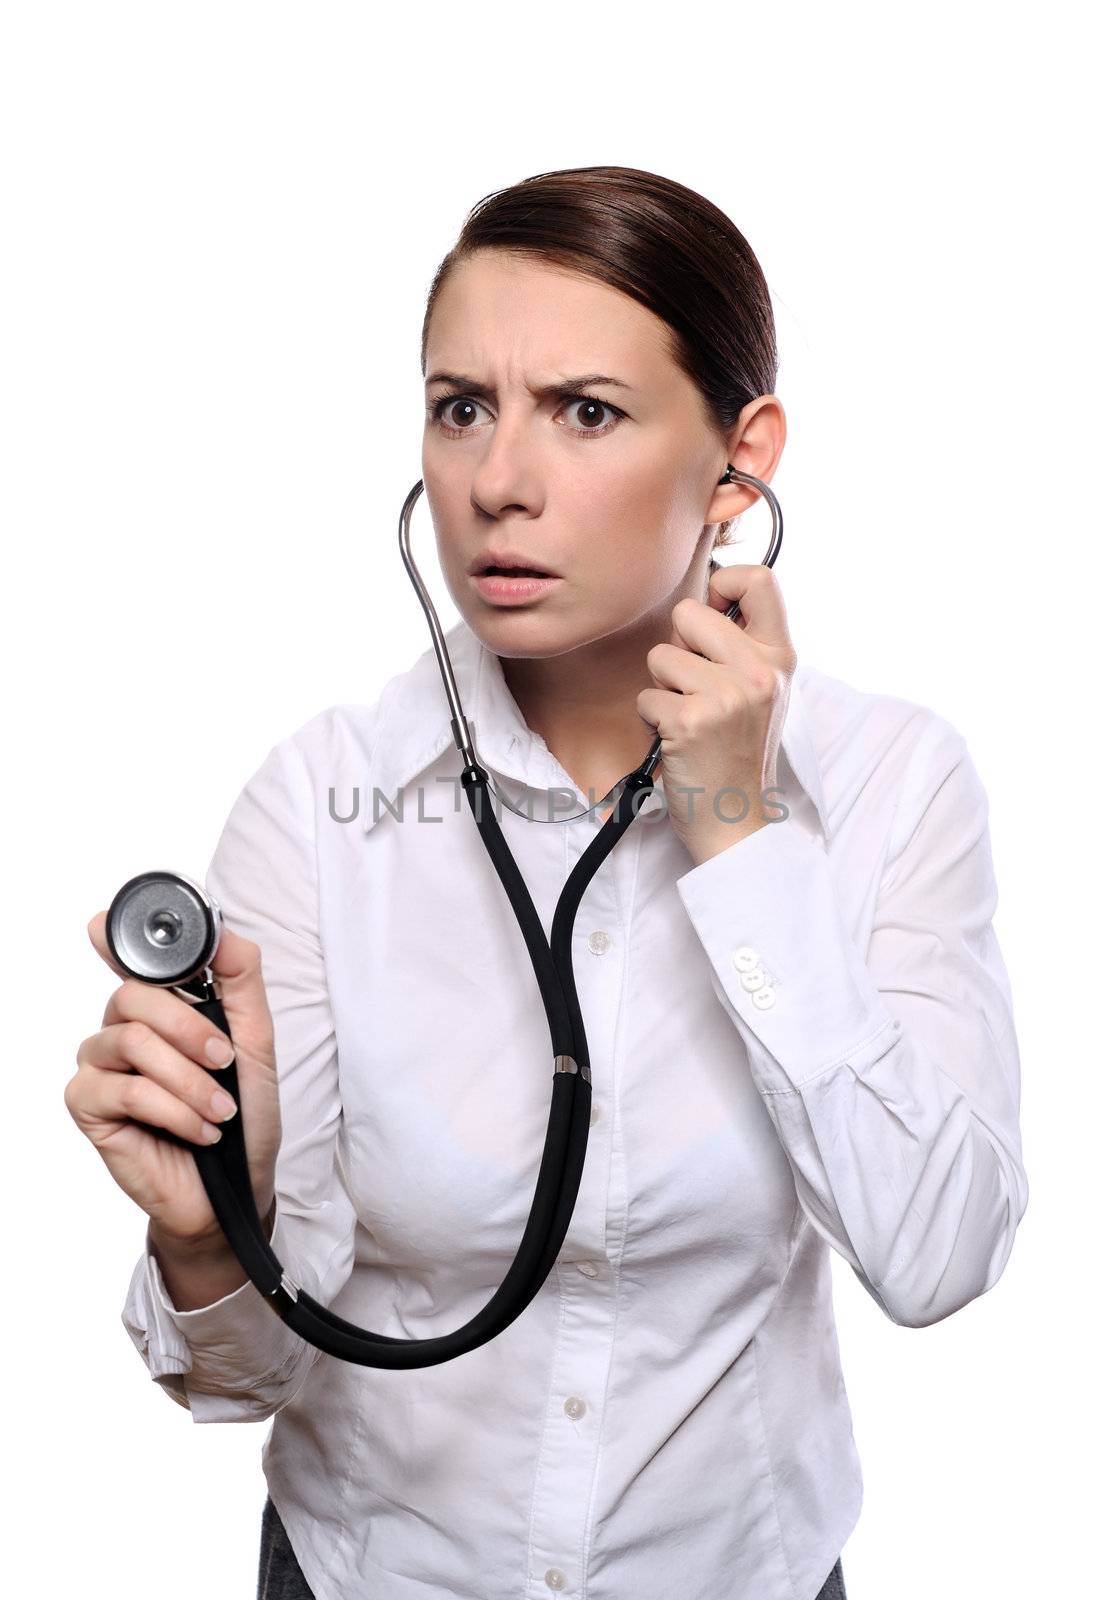 Frightened female doctor listen with a stethoscope isolated on white background